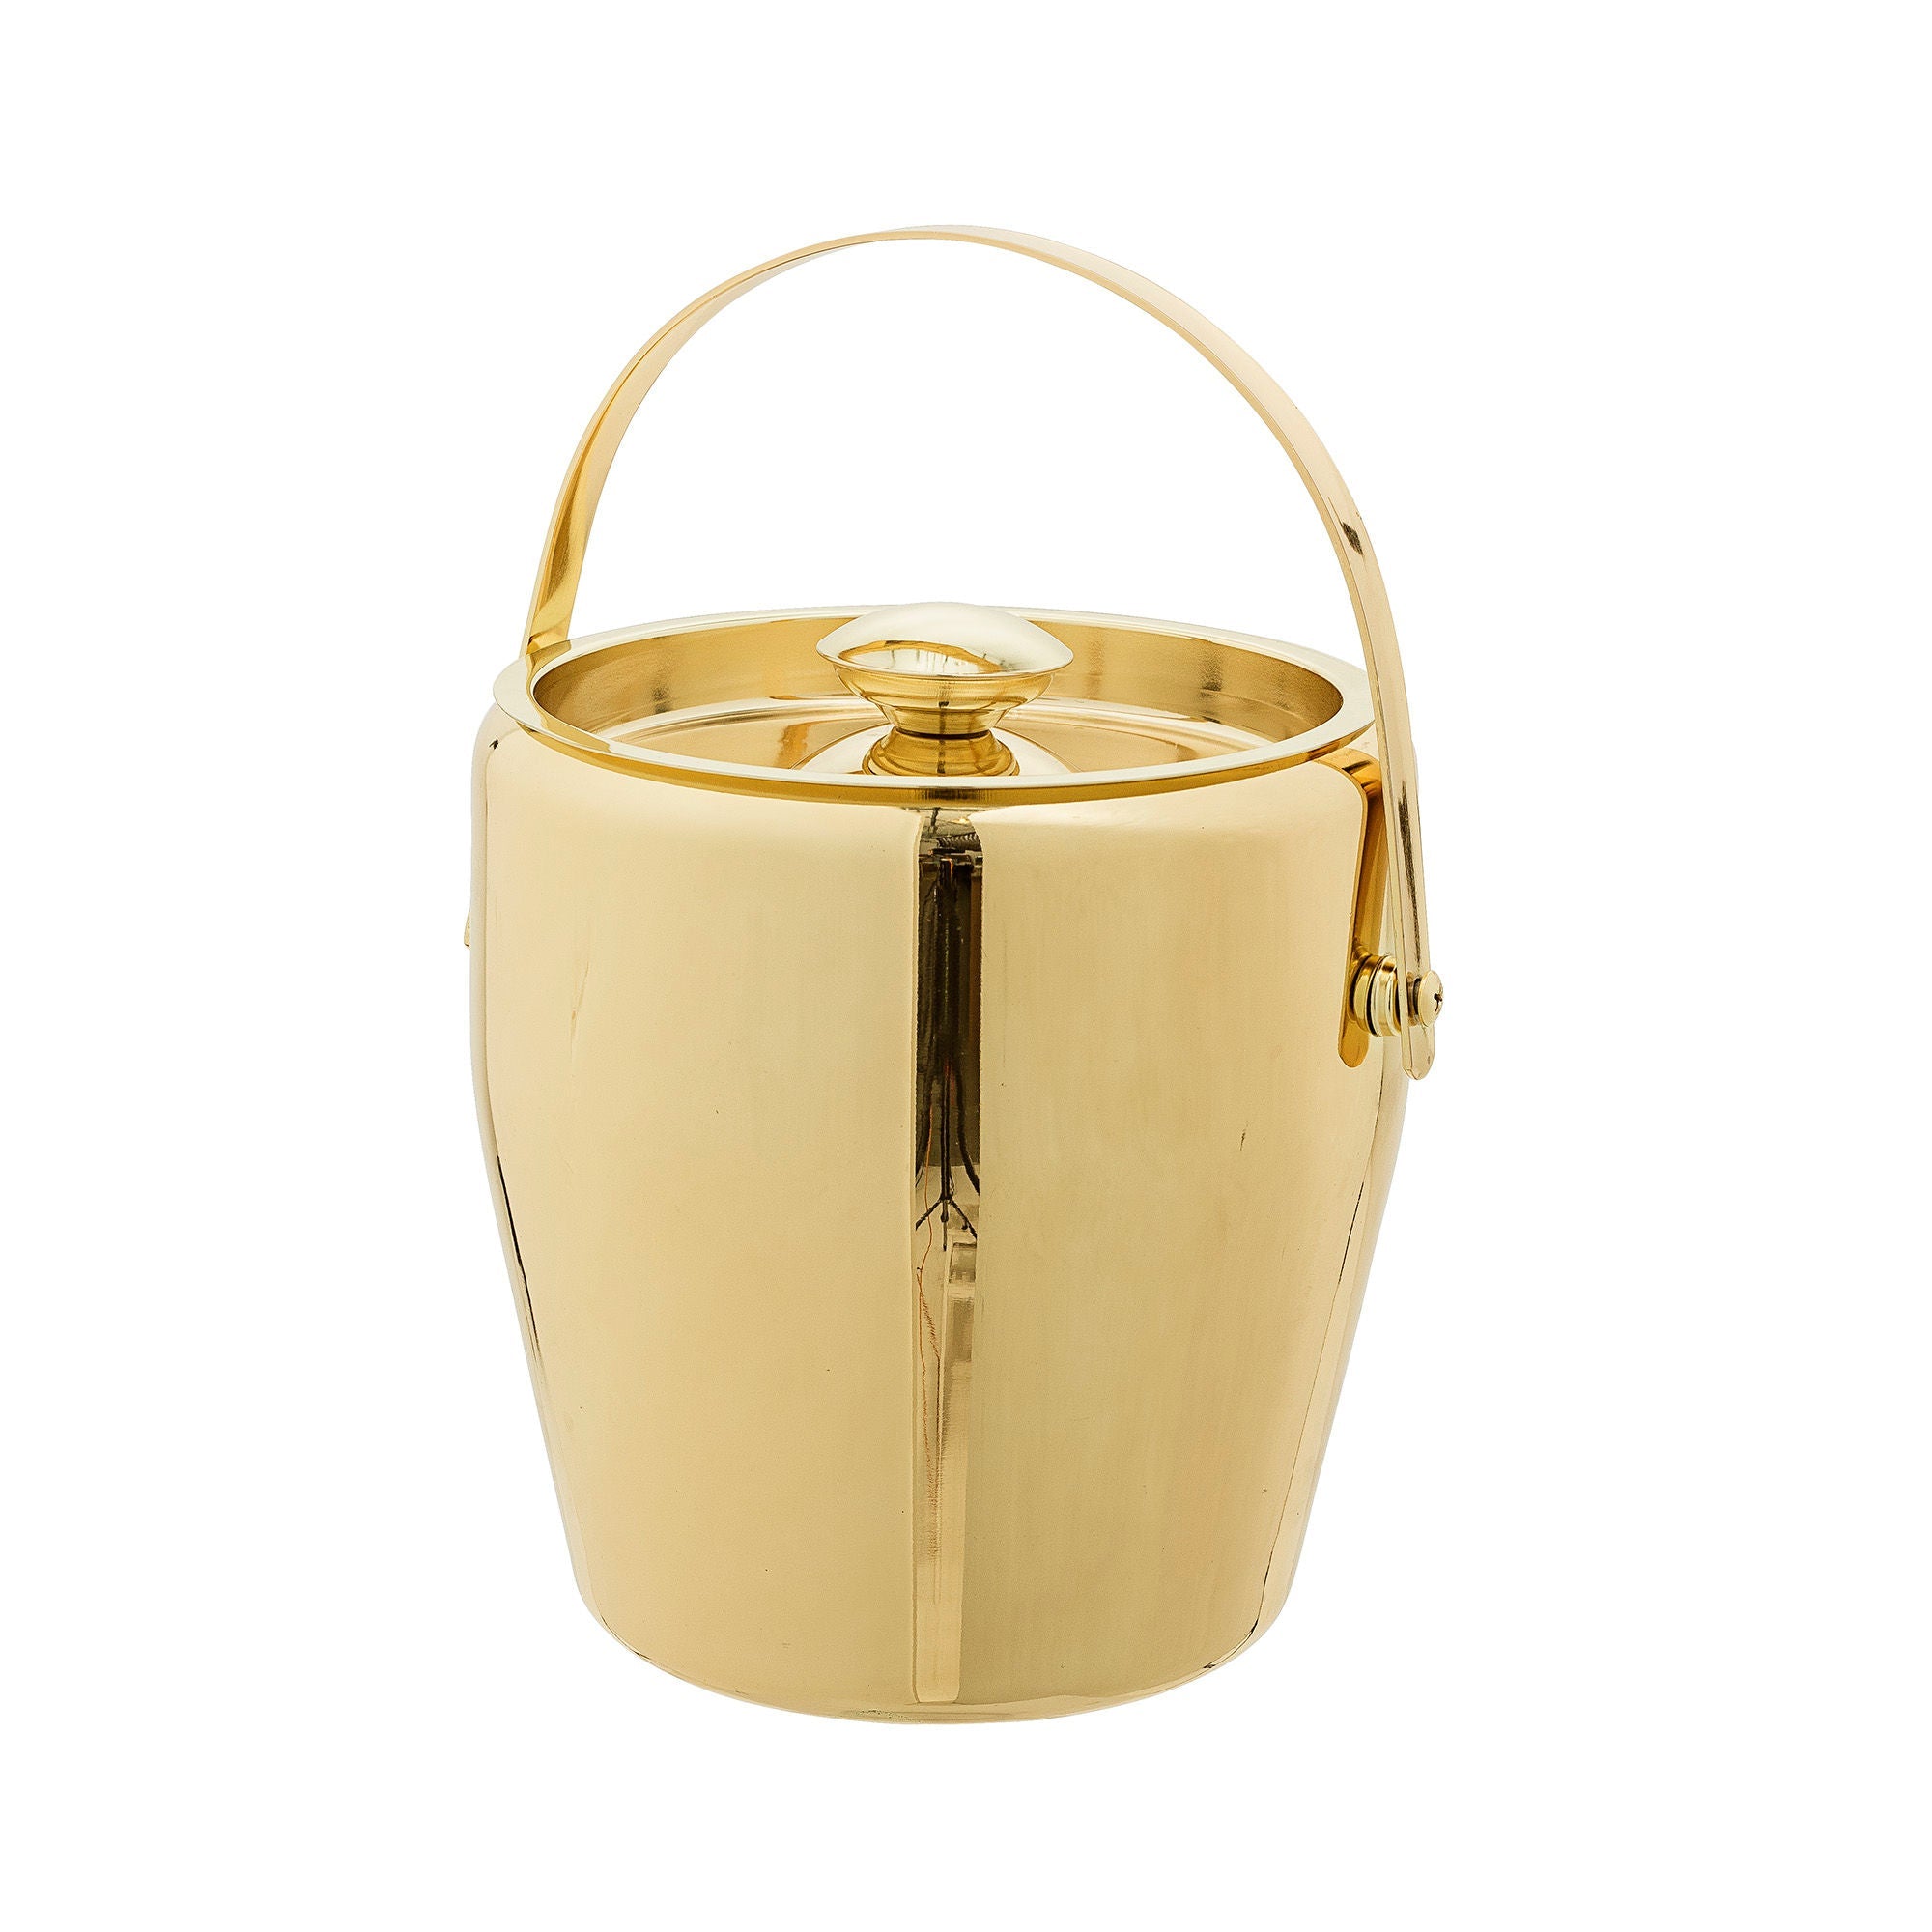 Bloomingville Cocktail Ice Bucket, Gold, Stainless Steel